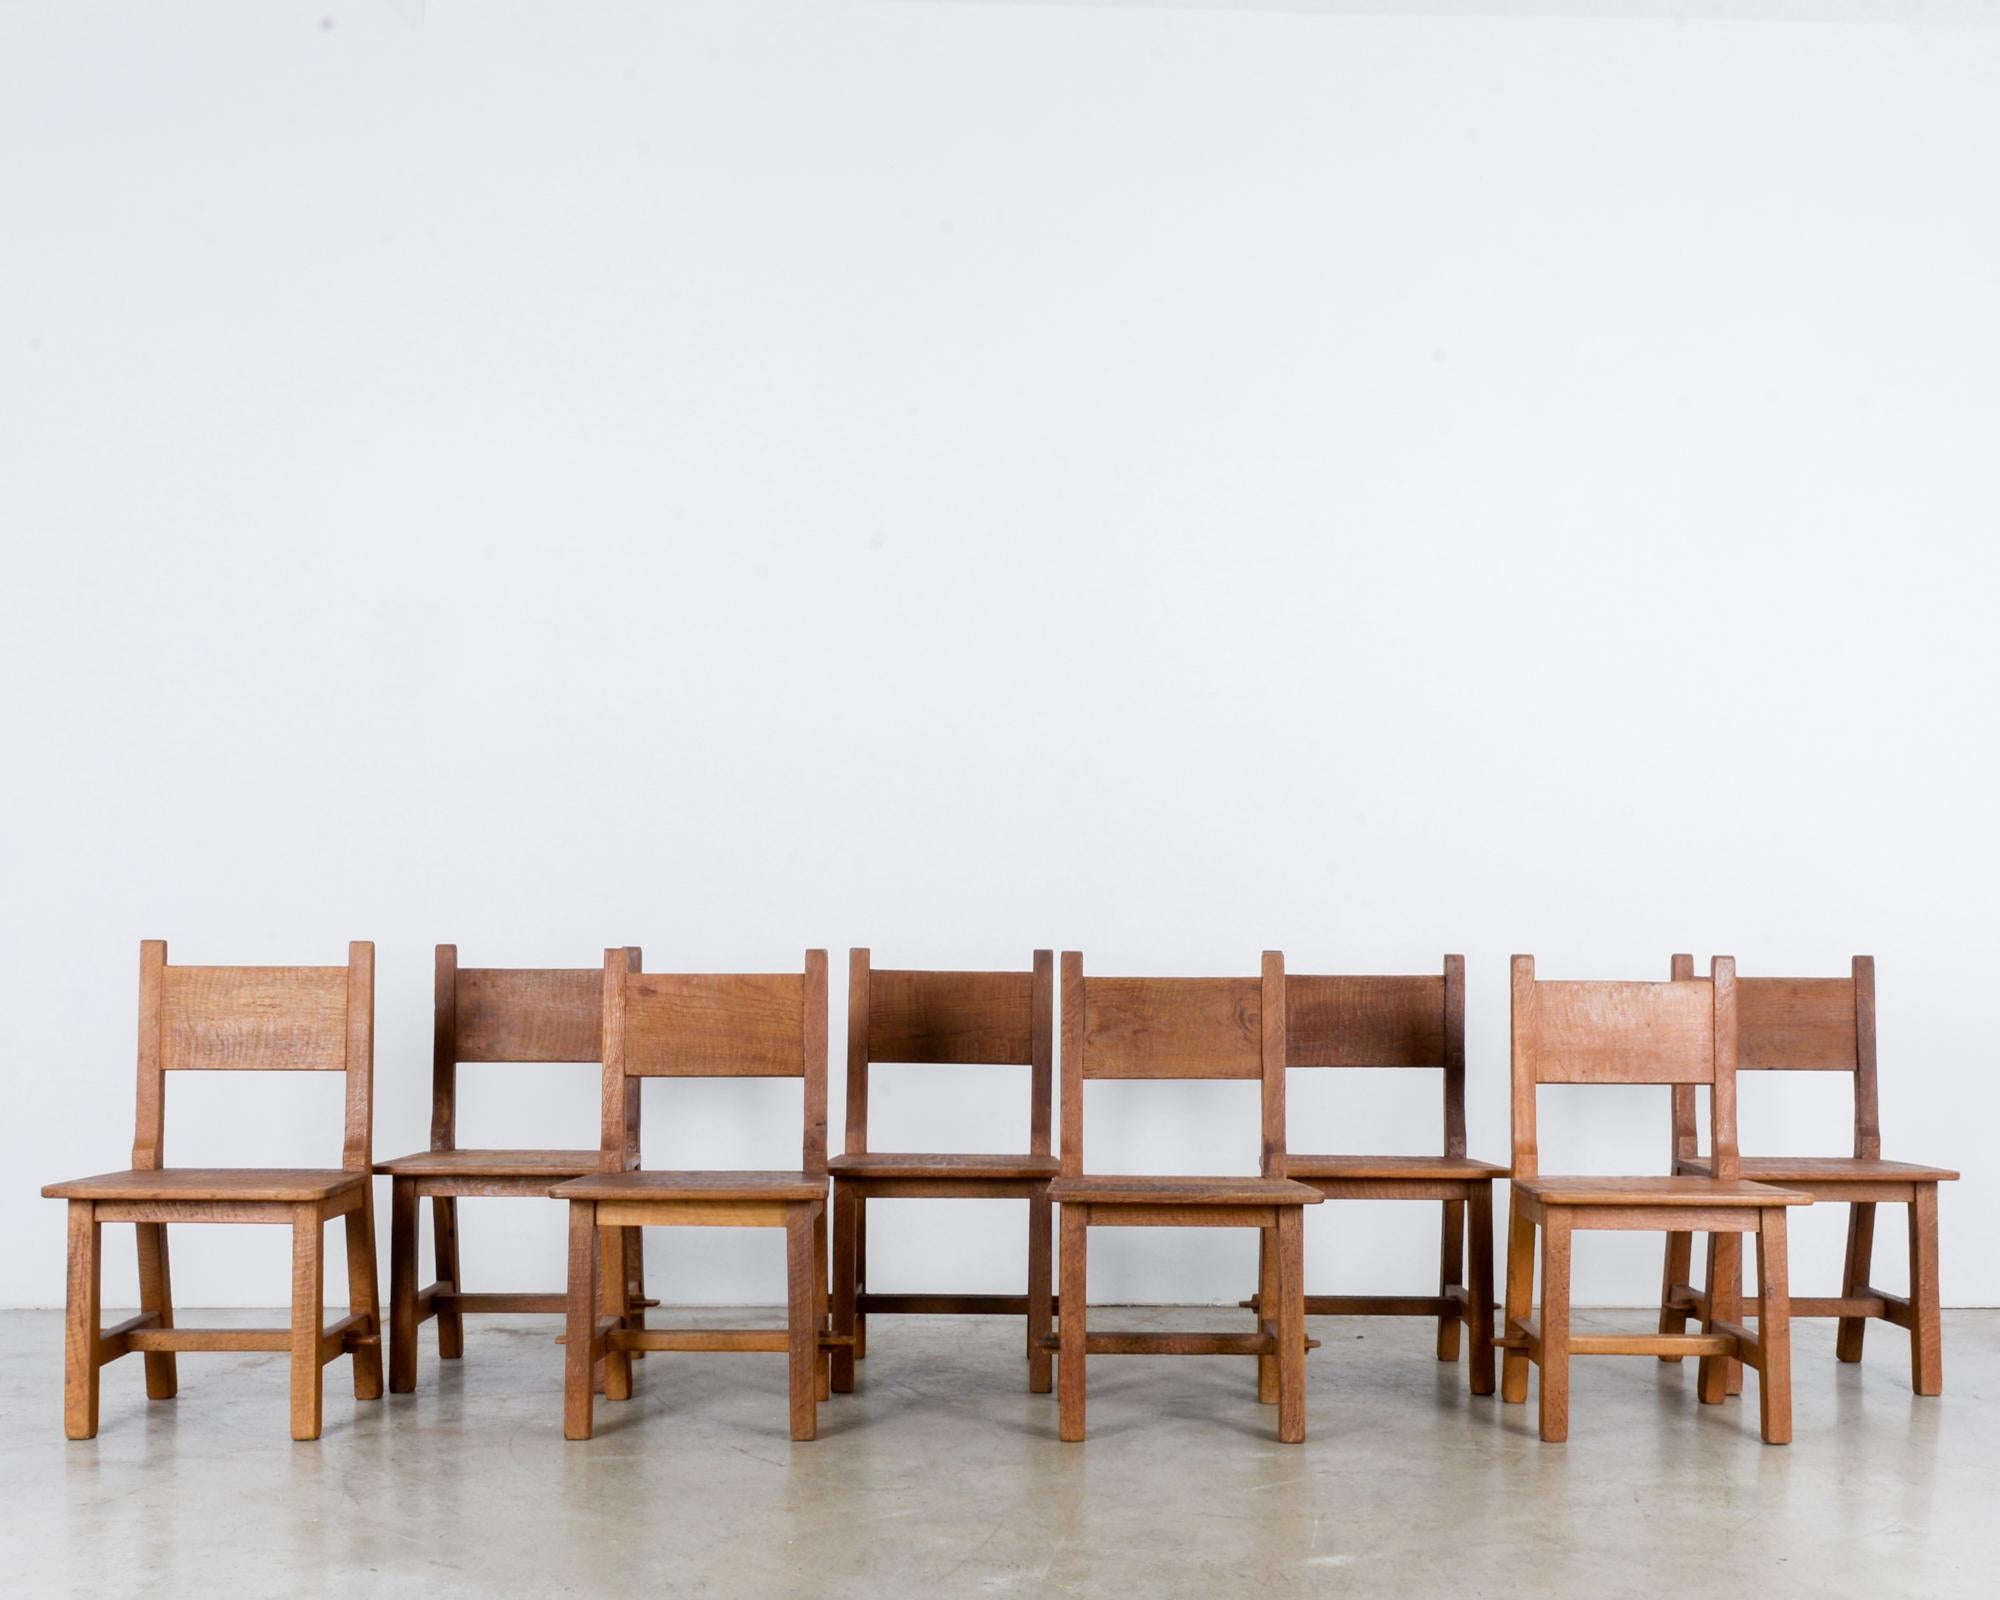 This set of eight wooden dining chairs was made in Belgium, circa 1960. These chairs are emblematic of the tactile and handmade characteristics of 1960s design. The polished wood exudes warmth, and the chairs are fabricated to display its highly